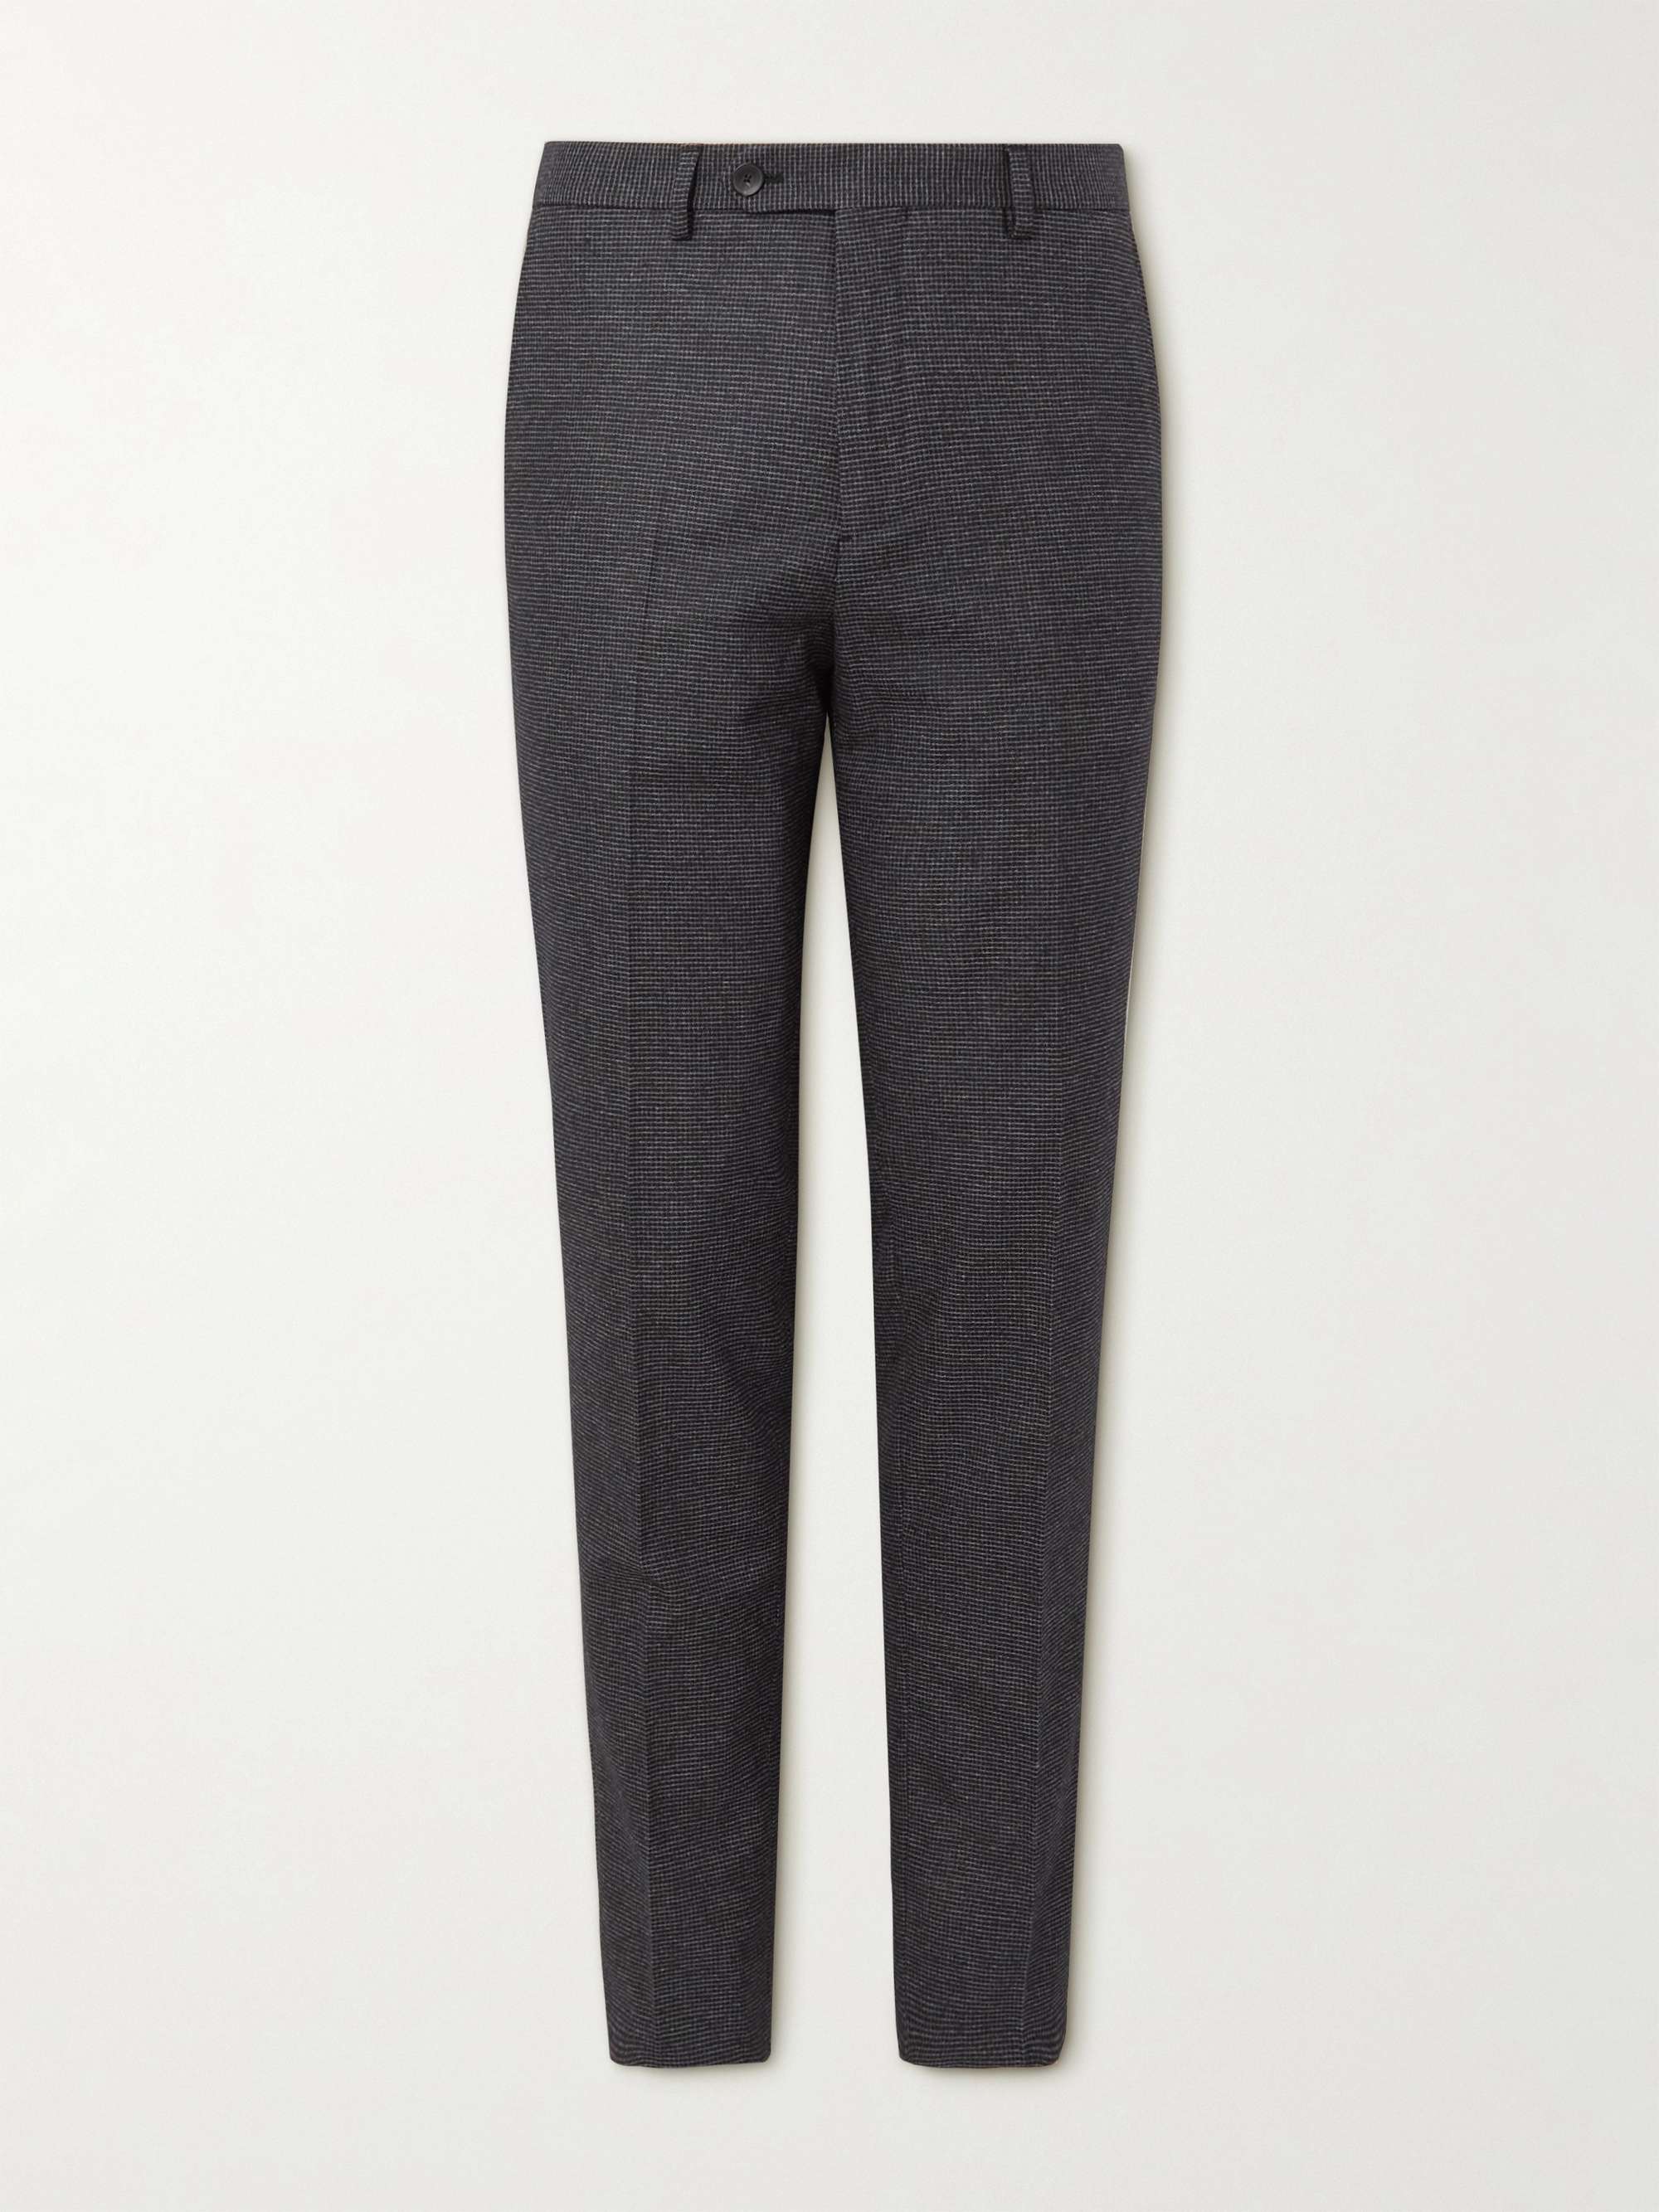 MR P. Slim-Fit Checked Woven Trousers